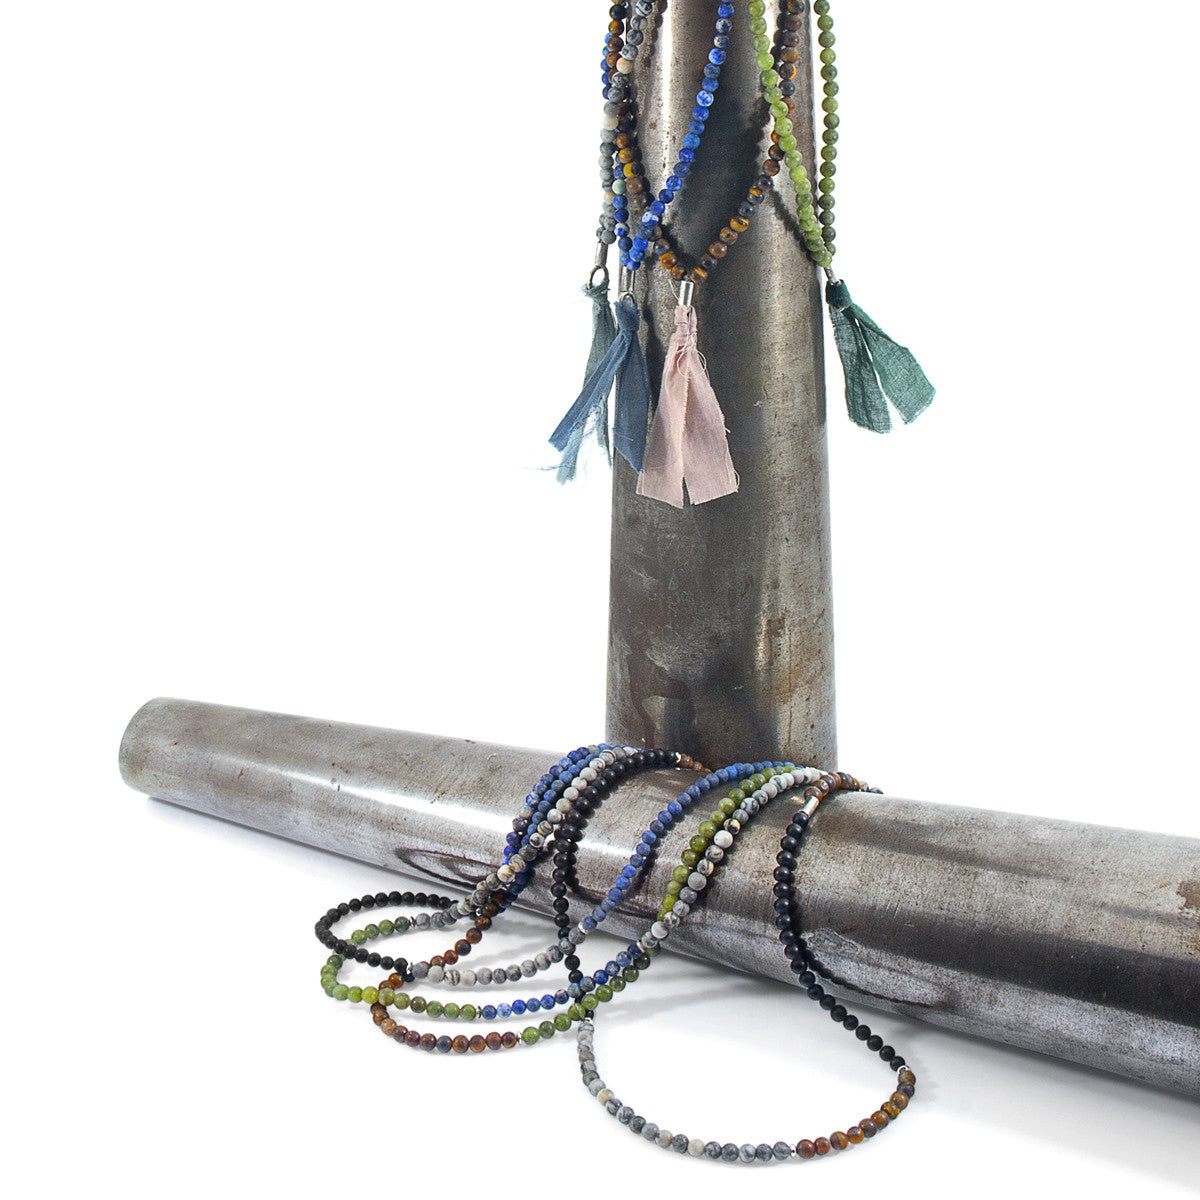 Brown Tigers Eye, Blue Sodalite and Green Jade Isaac Silver and Stone SKINNY Necklace x Wrap Bracelet